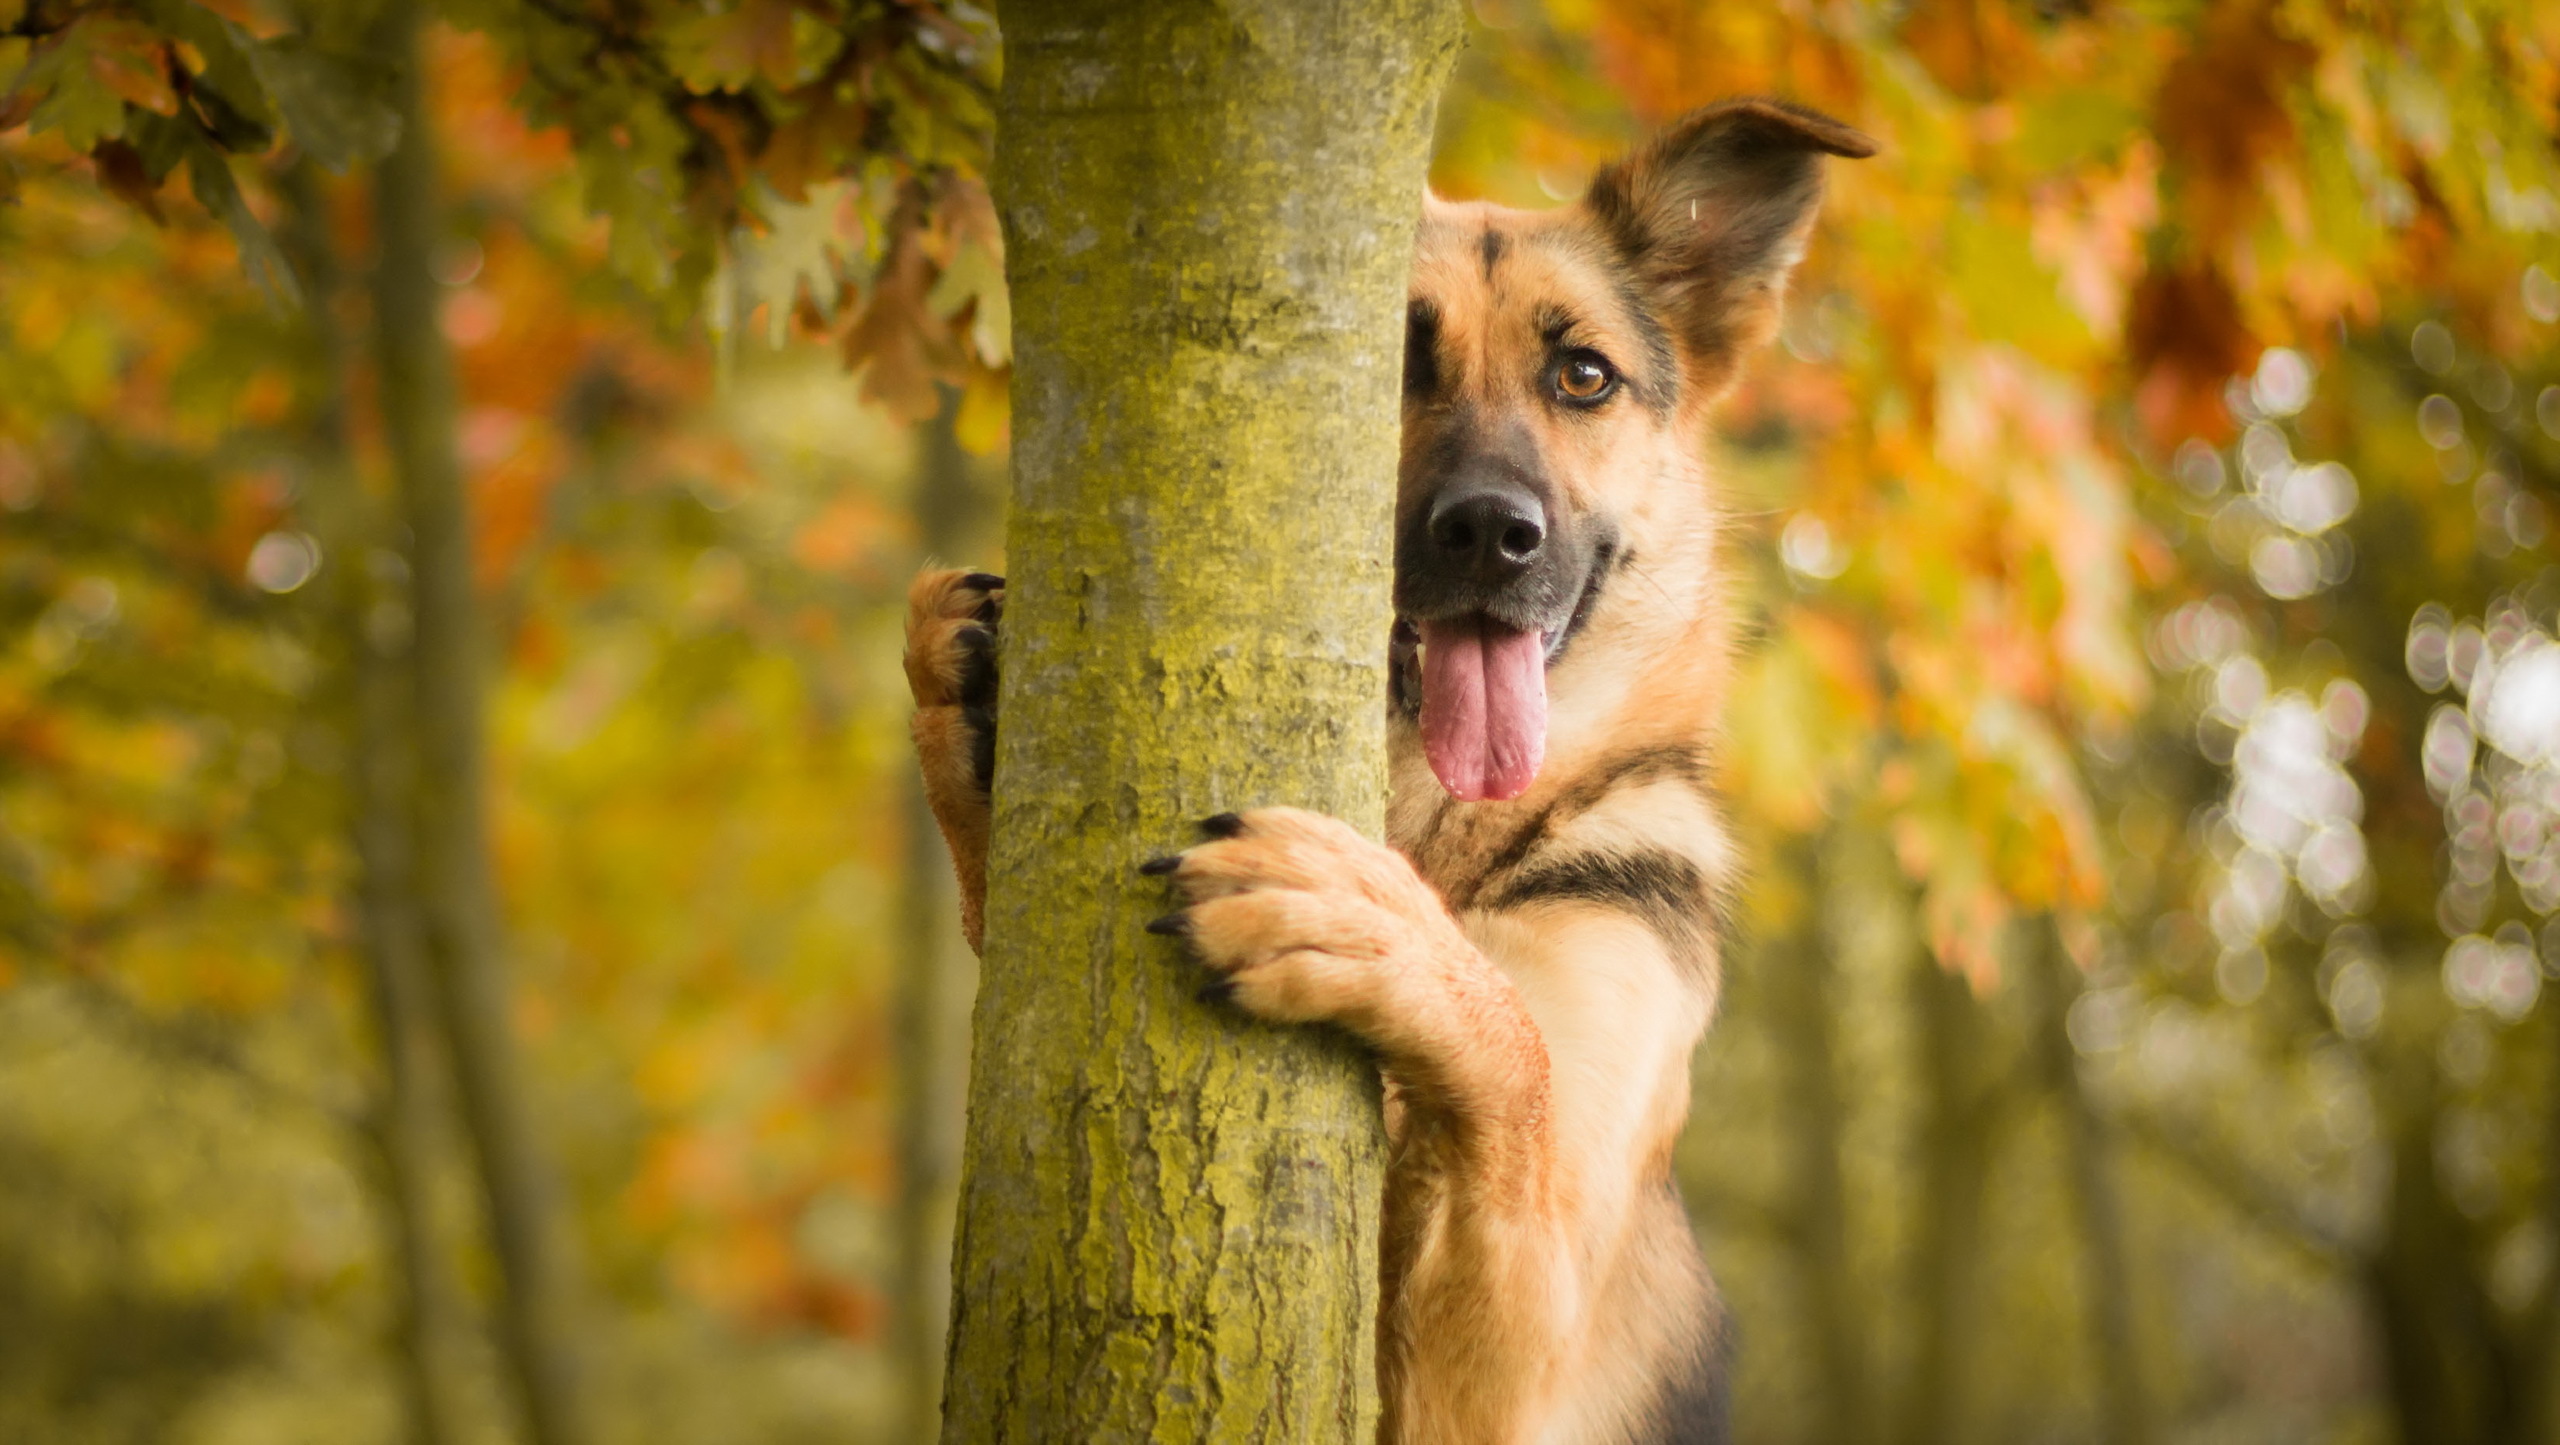 wood, animals, tree, dog, protruding tongue, tongue stuck out Image for desktop